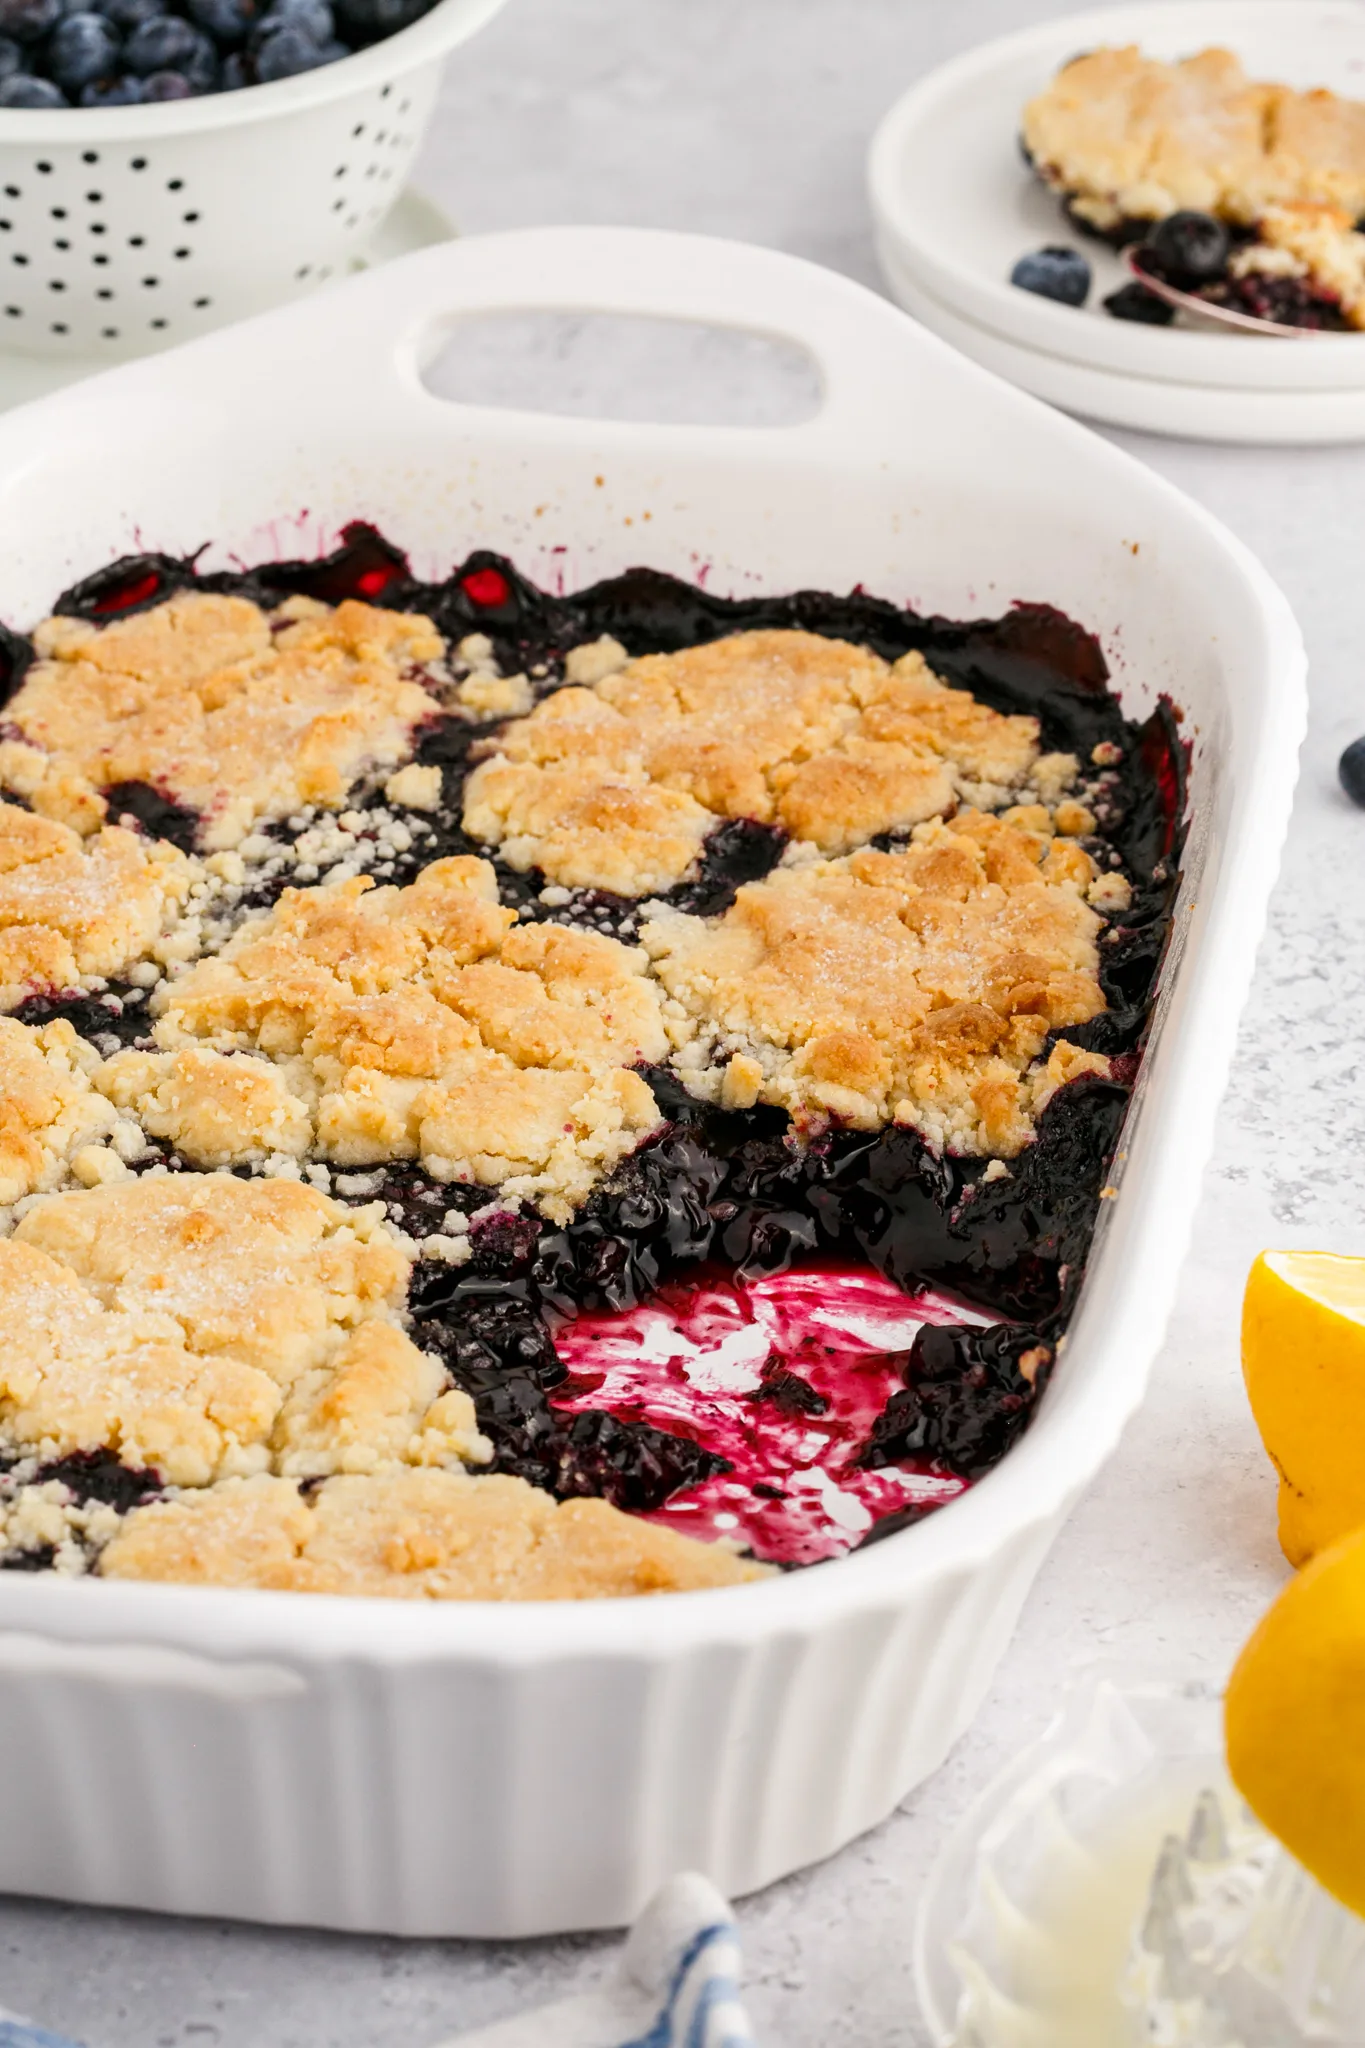 A photo of half eaten blueberry cobbler in a large casserole dish